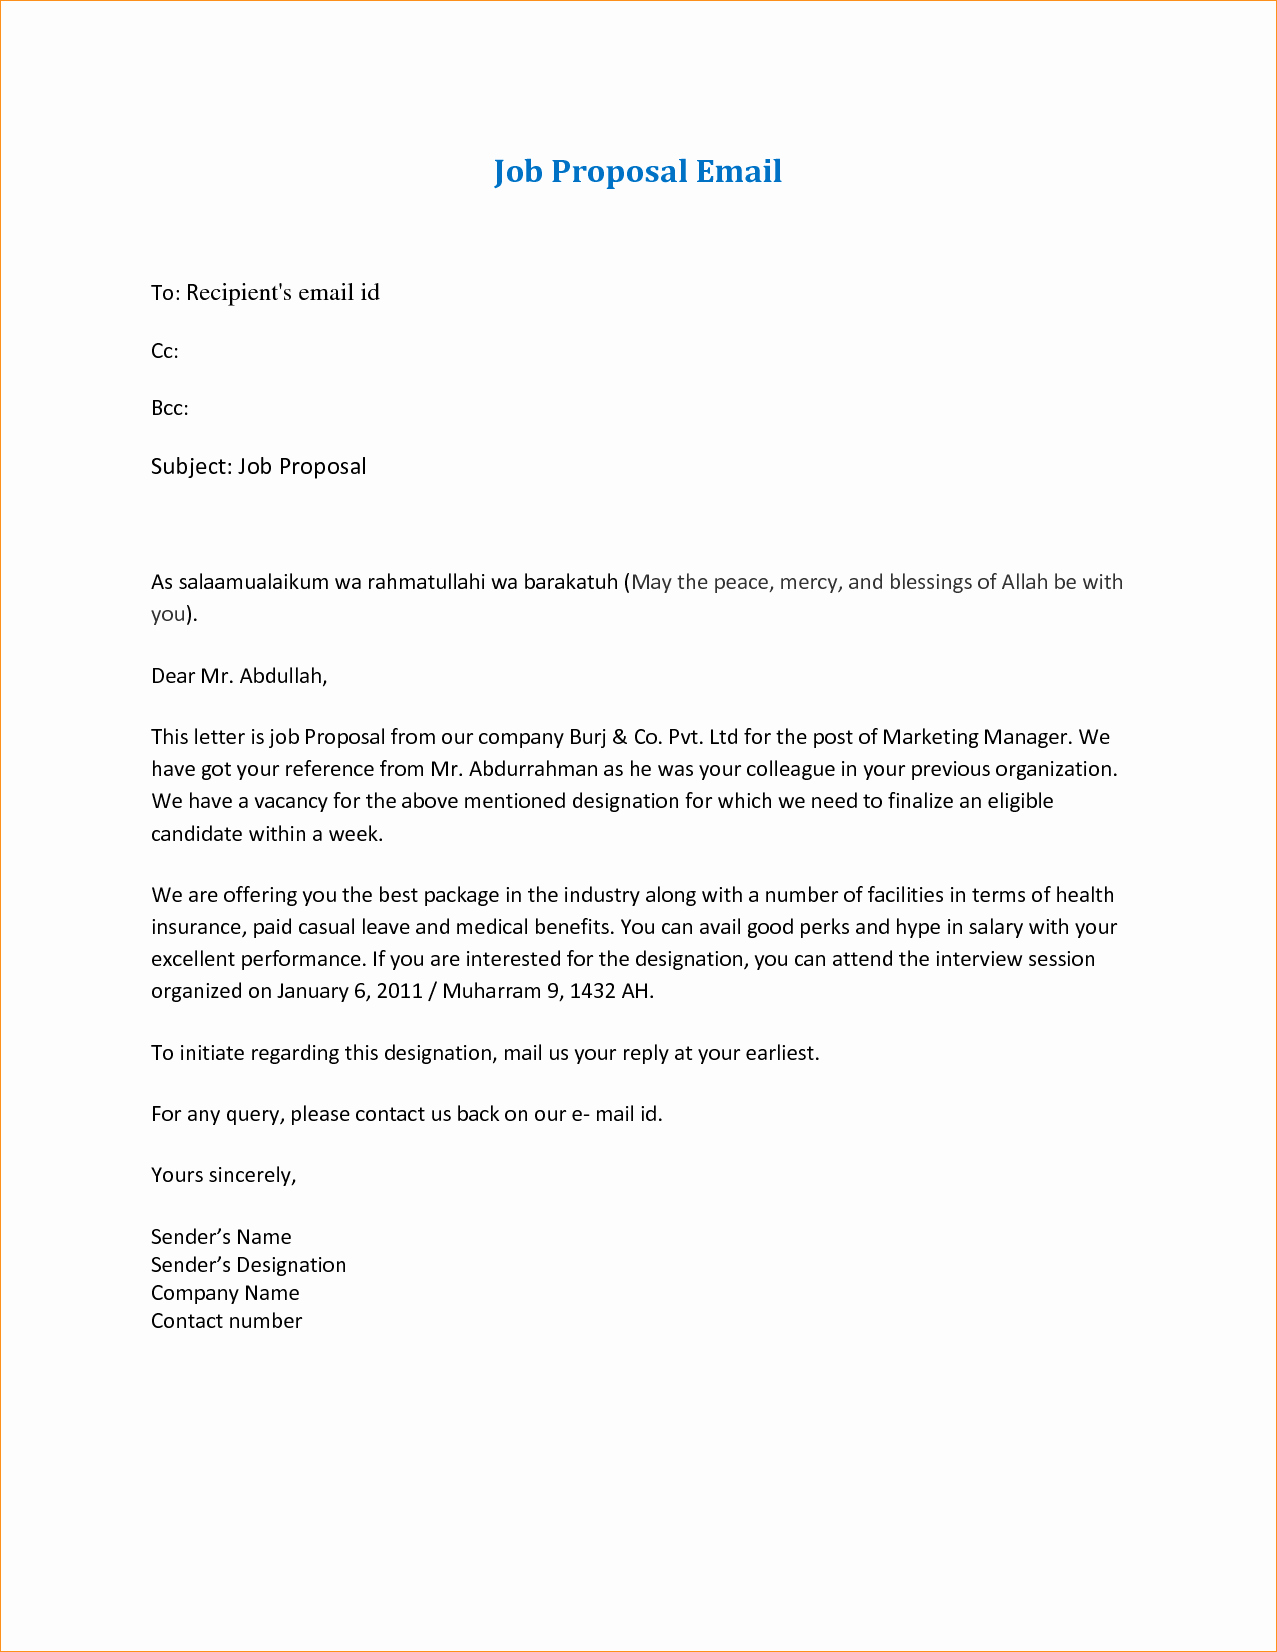 Business Proposal Email Template New Job Proposal Example Business Proposal Templated